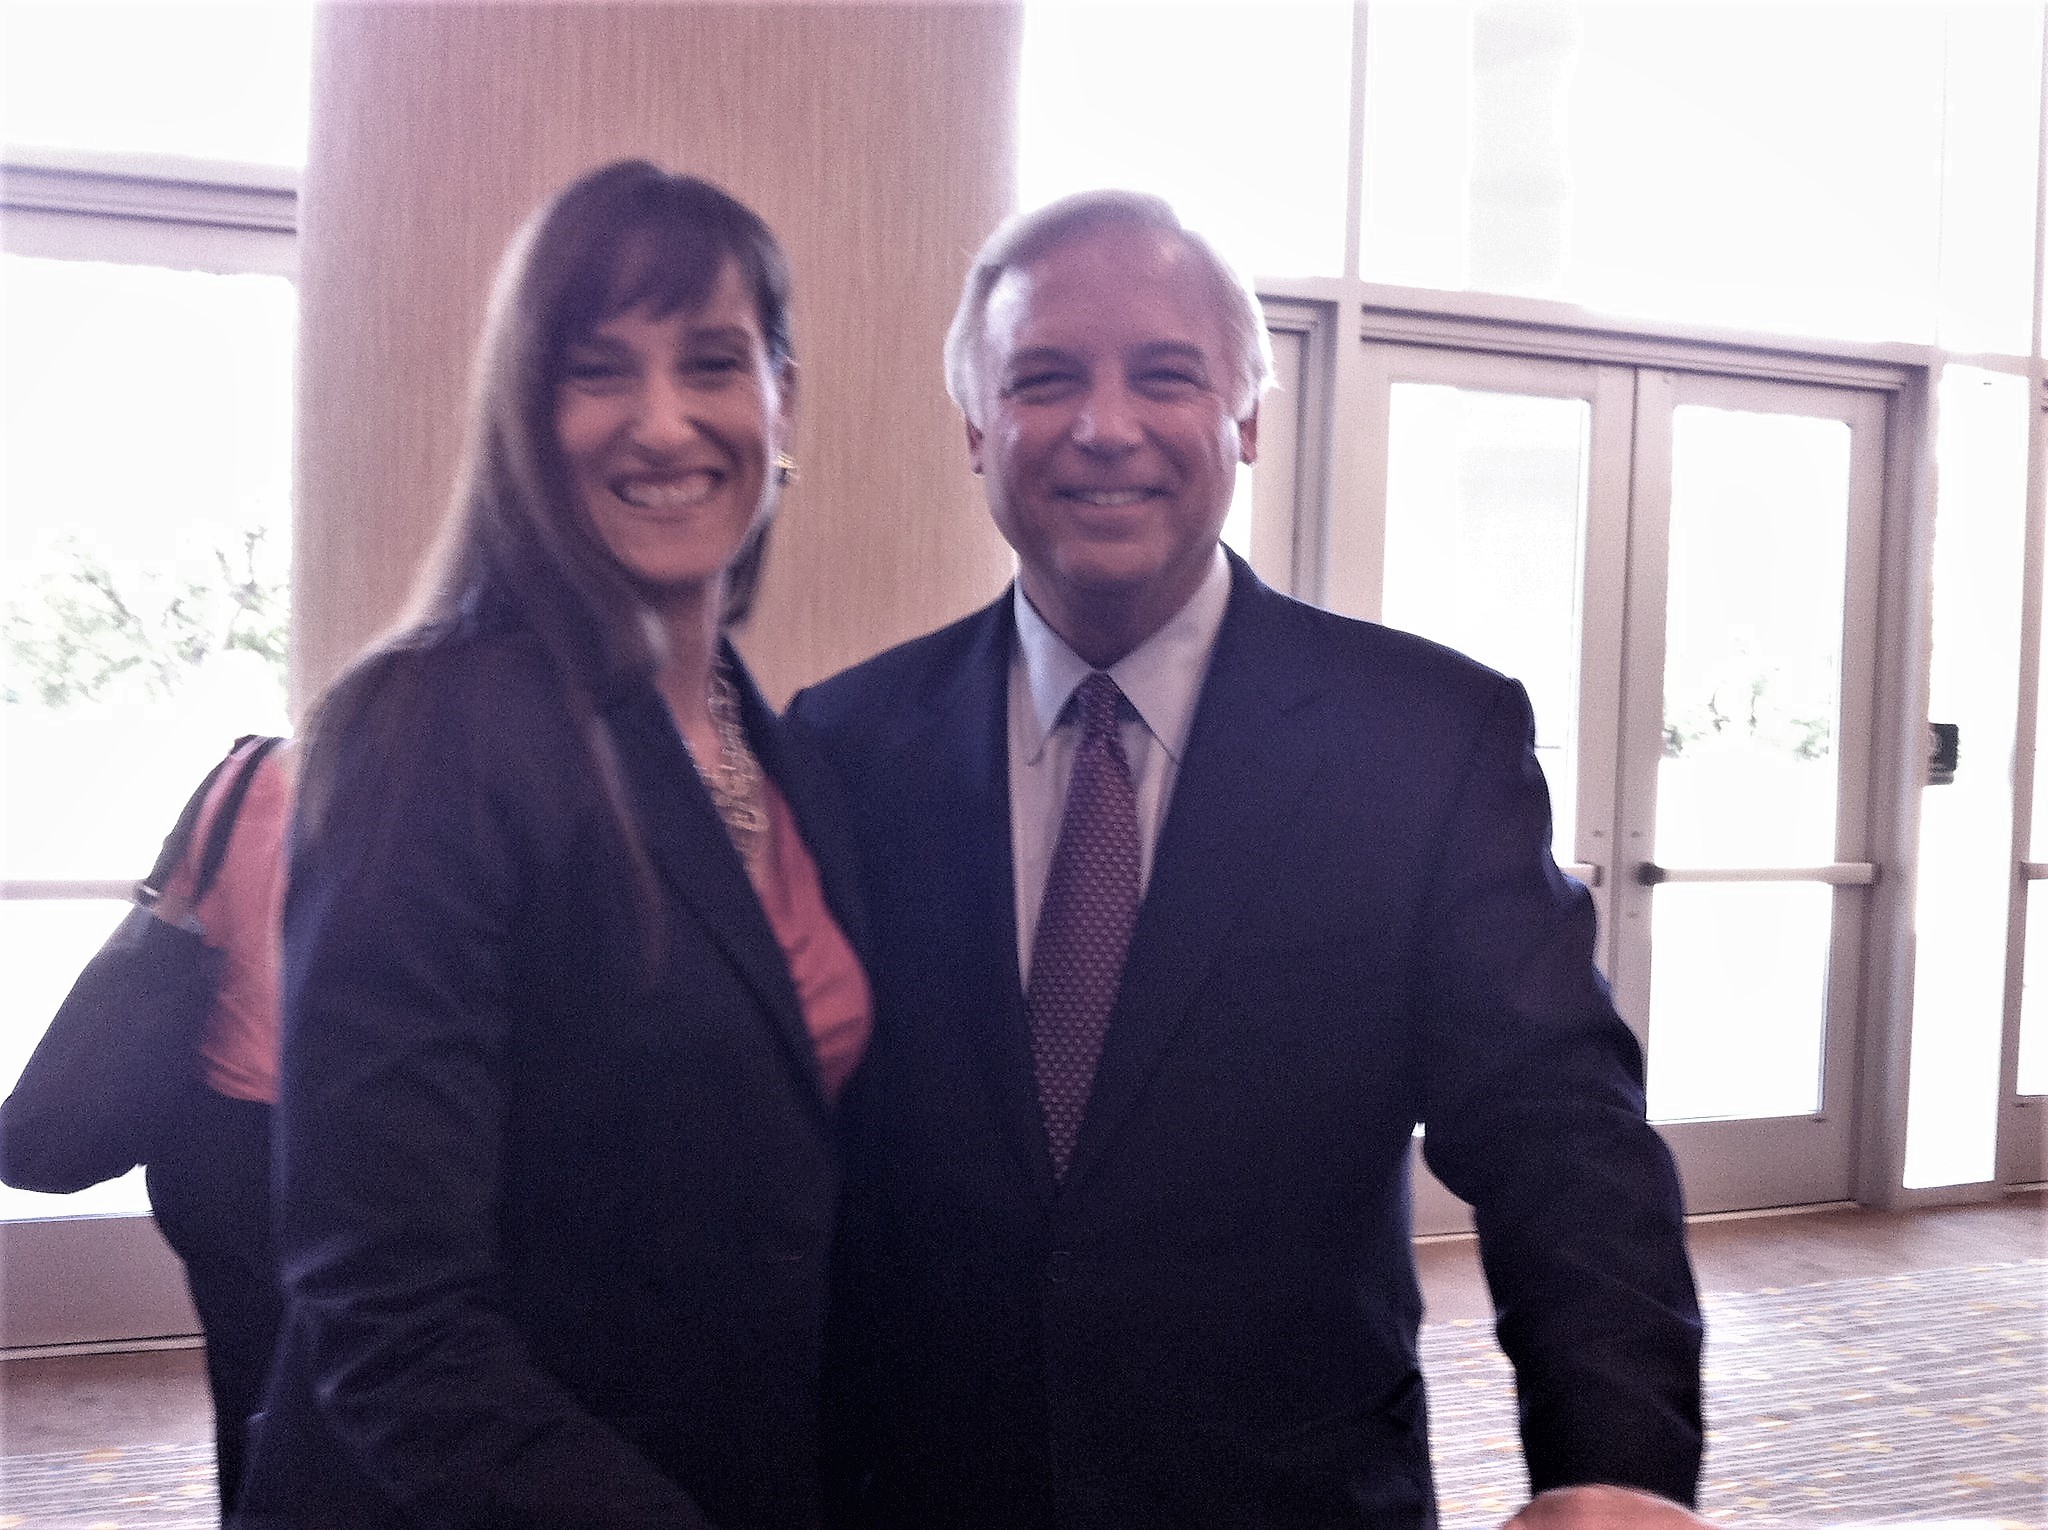 Dr. Nathalie Beauchamp with Jack Canfield at an annual eWomen Network Conference in Dallas.